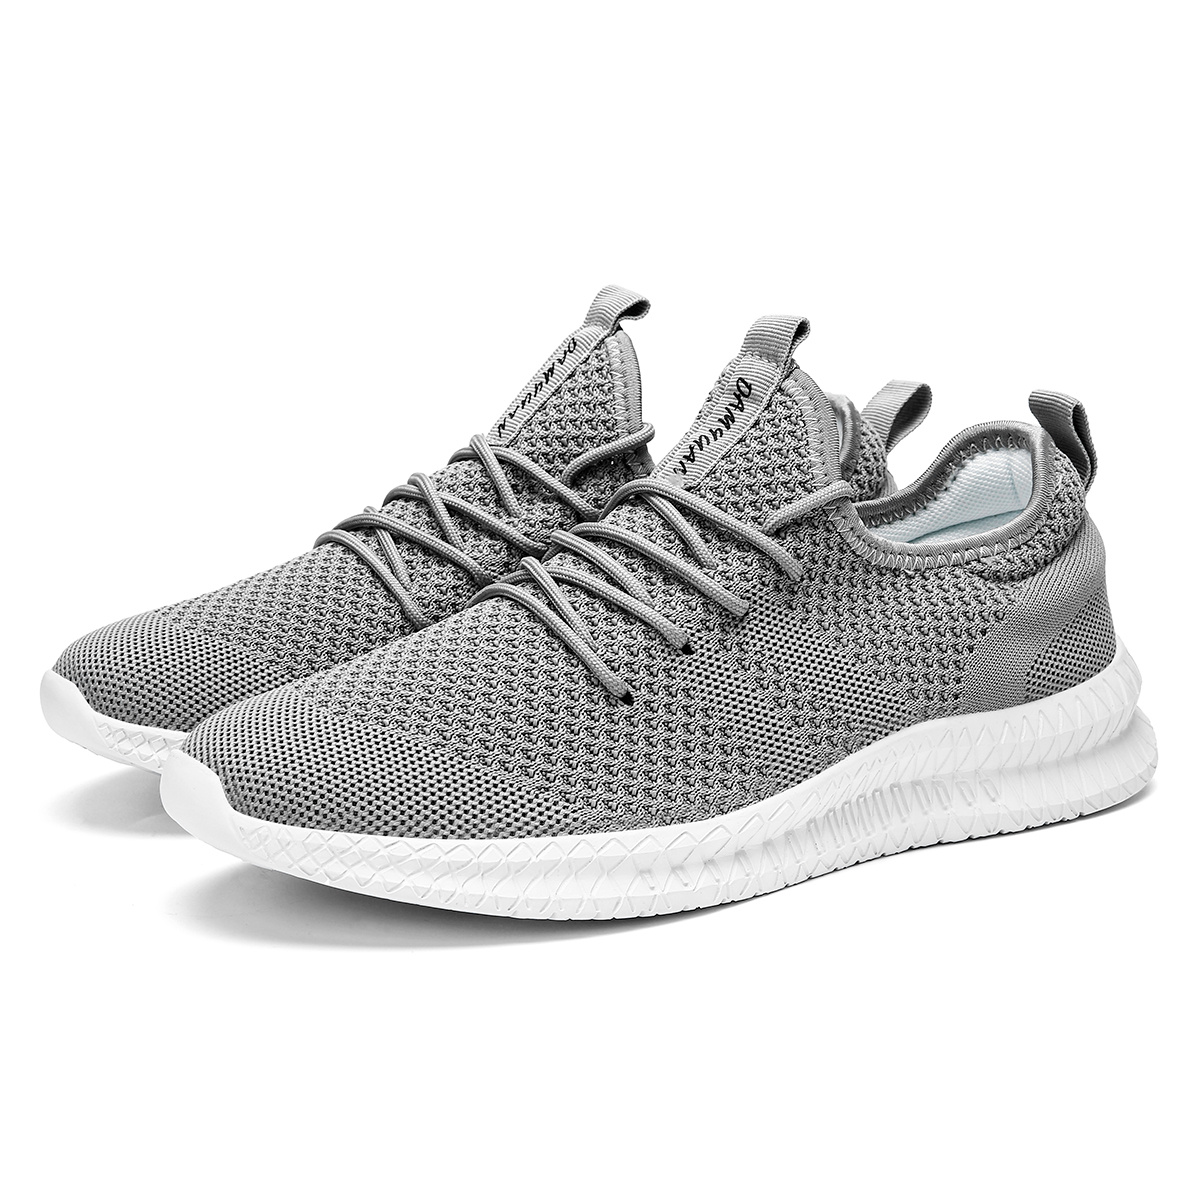 mens running shoes couple knit breathable lightweight running shoes outdoor athletic walking sneakers spring and summer details 9